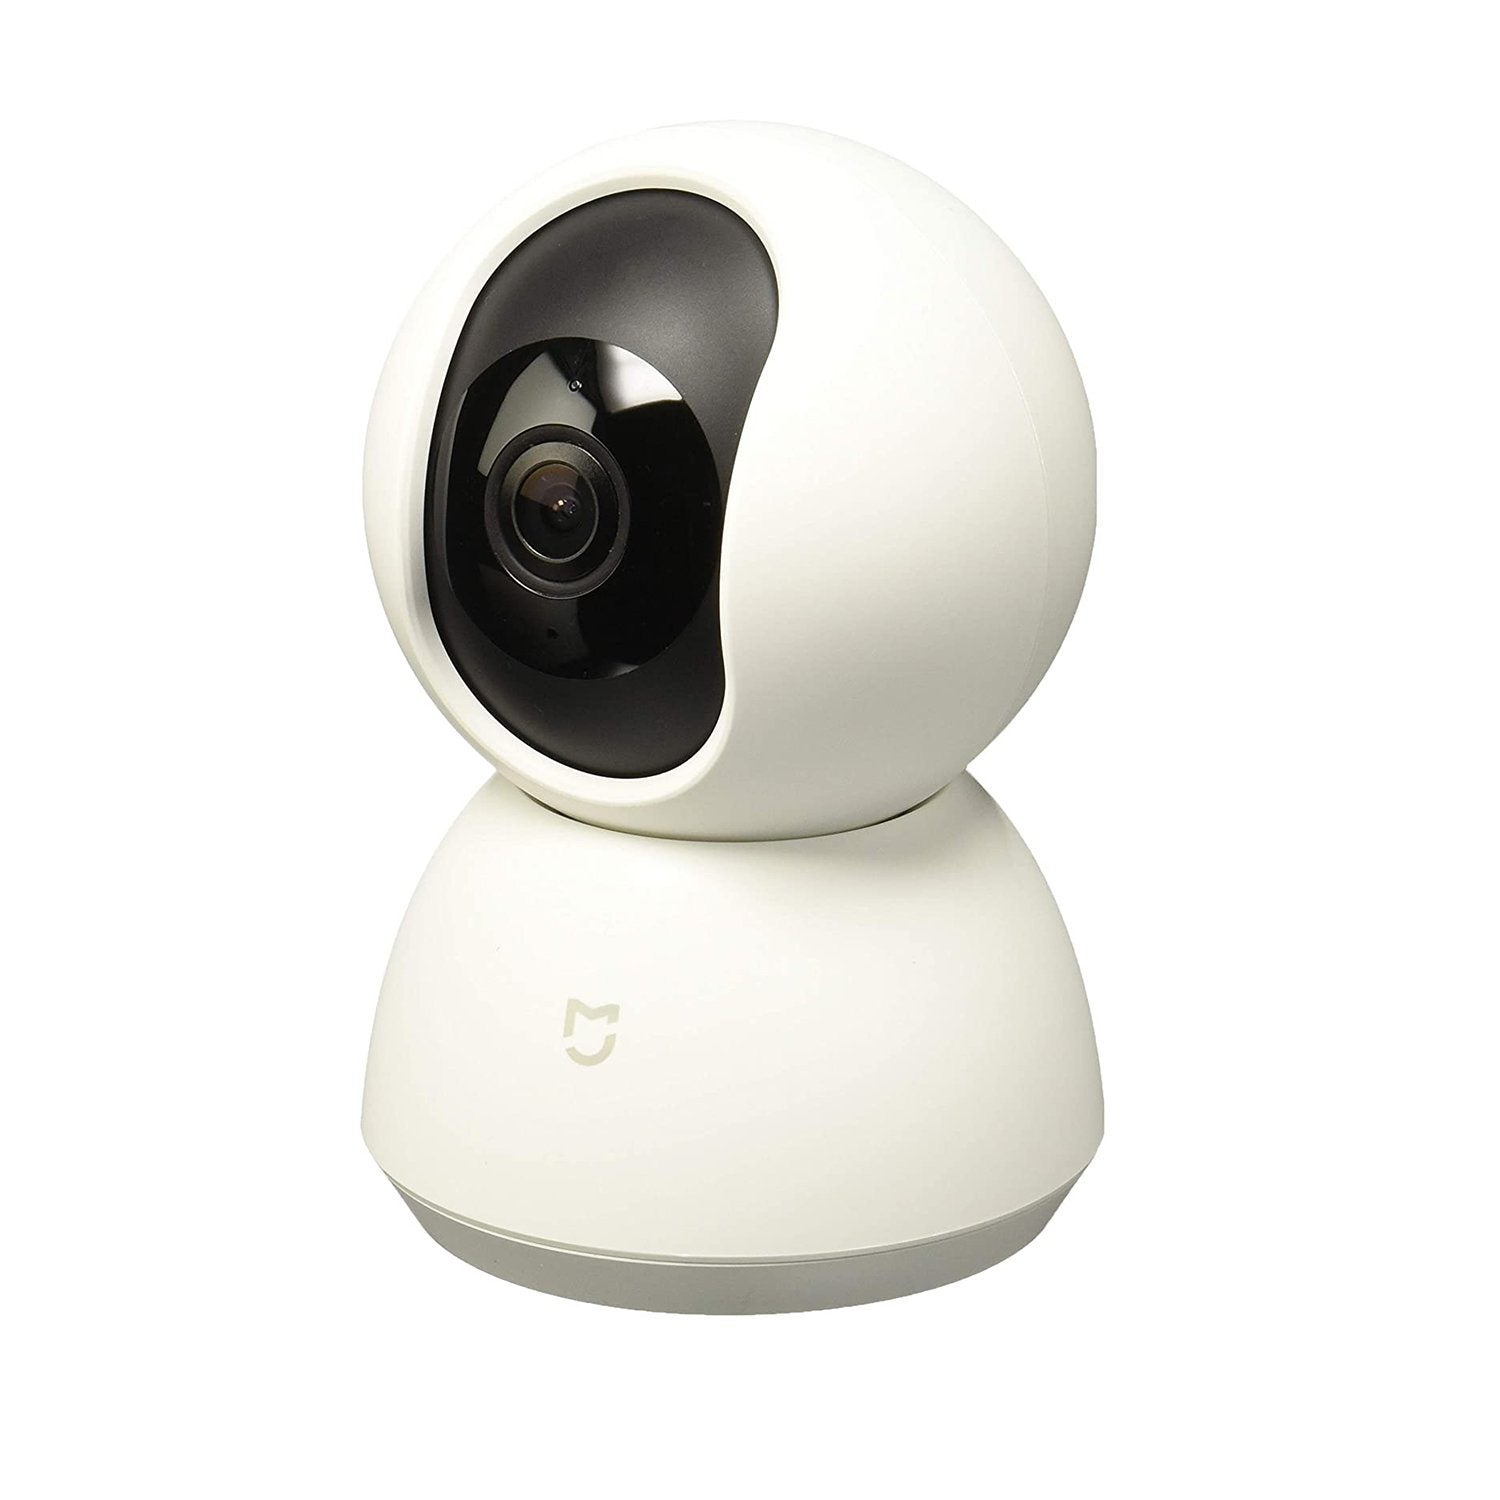 Xiaomi Mijia PTZ 2K Home Security Camera 360° CCTV 1080P Full HD with Infrared Night Funsion, White Default Xiaomi Default 